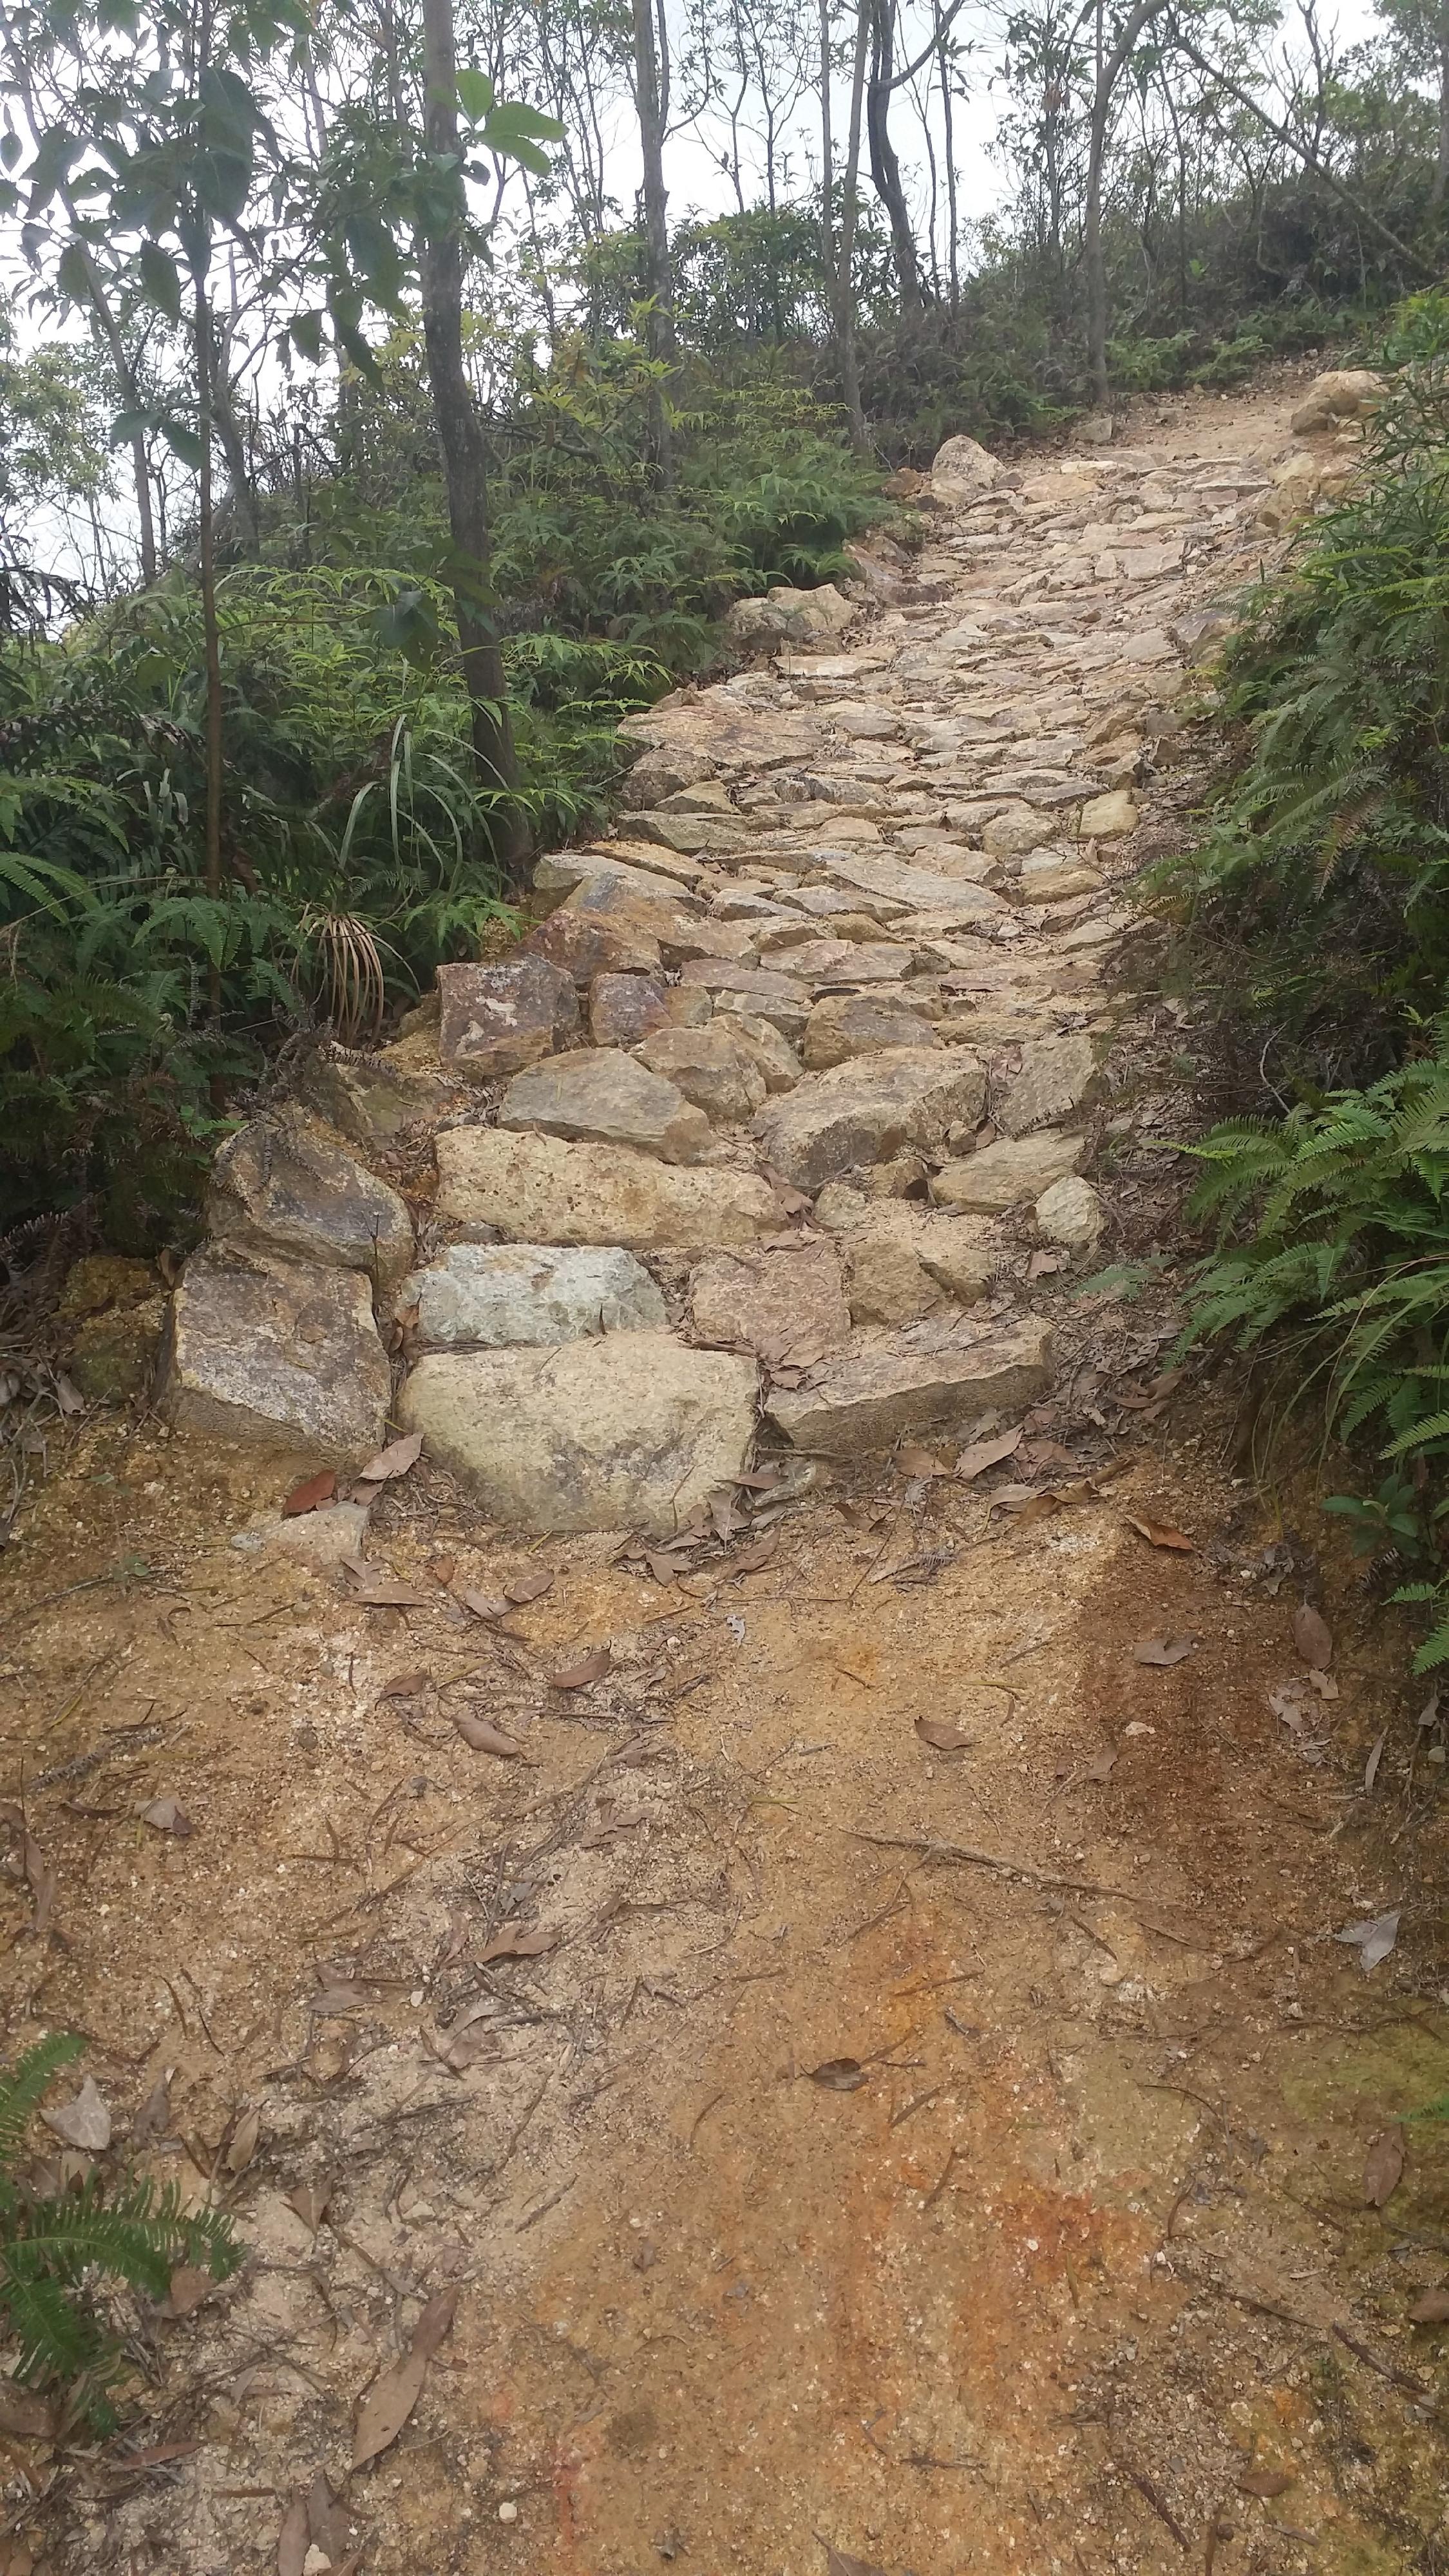 The Mui Wo Mountain Bike Practice Ground opens today (December 17). Photo shows a rock garden in the practice ground.